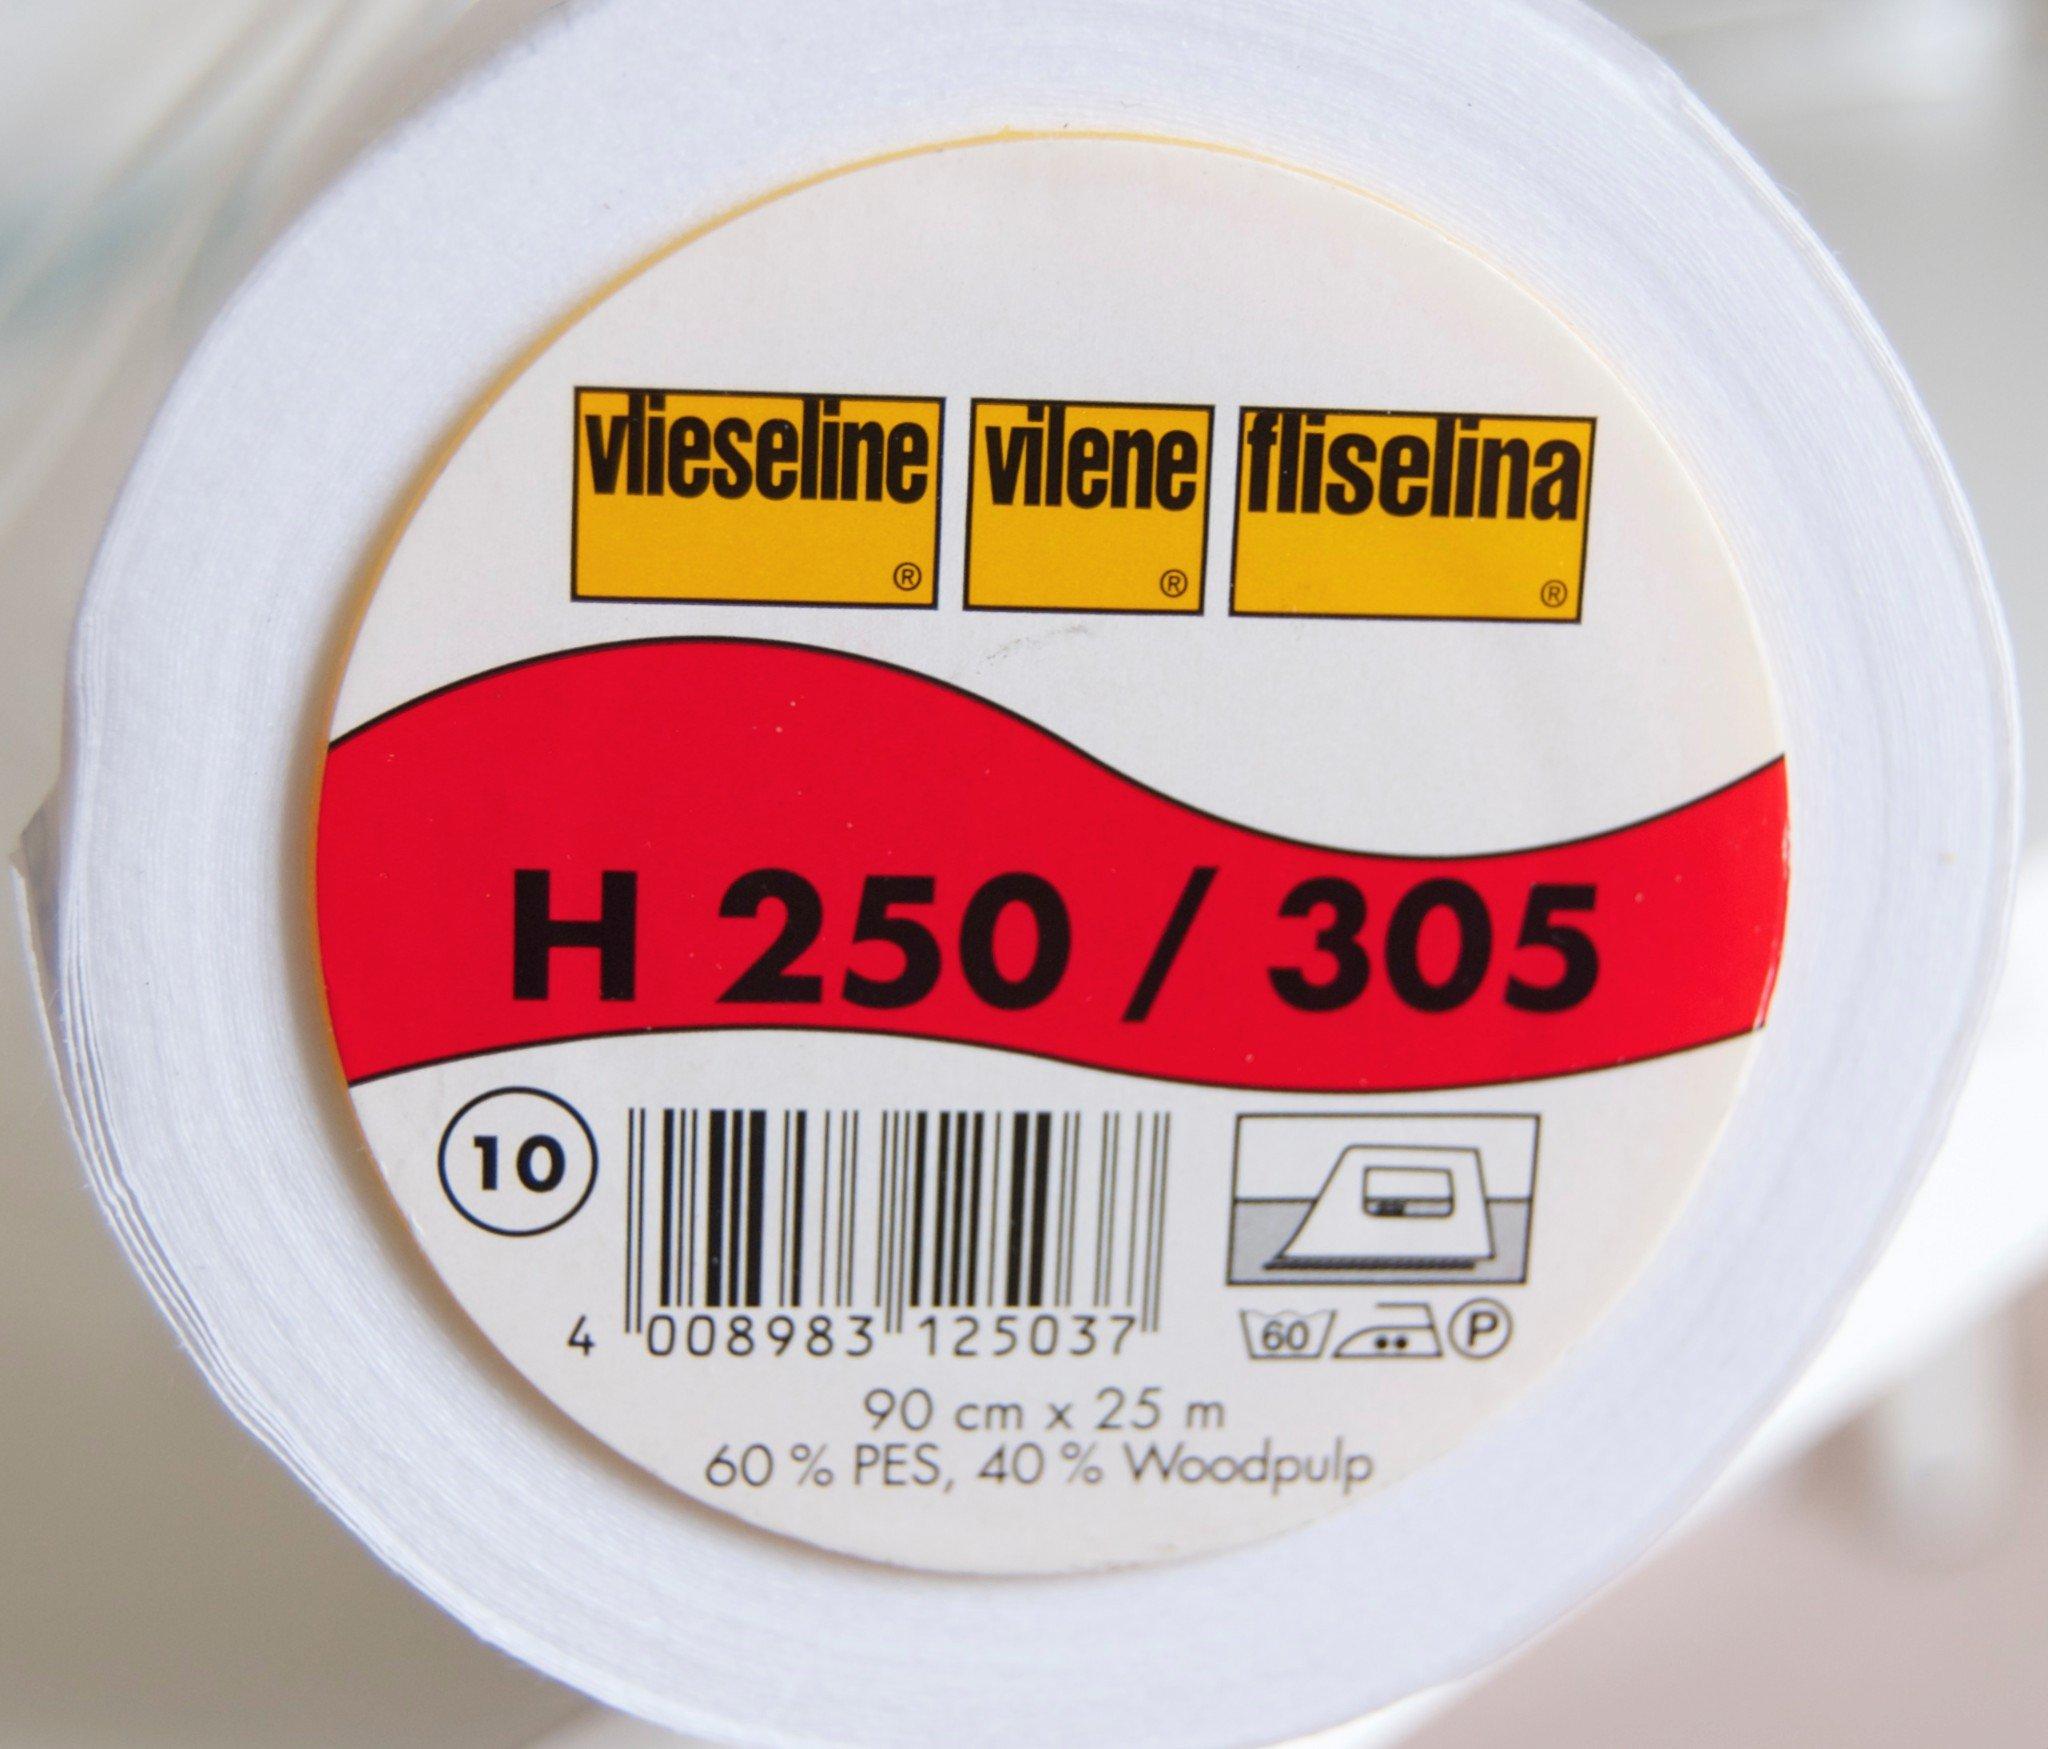 Vliseling H250/305 firm interfacing is likened to Pellon 808 Craft Fuse